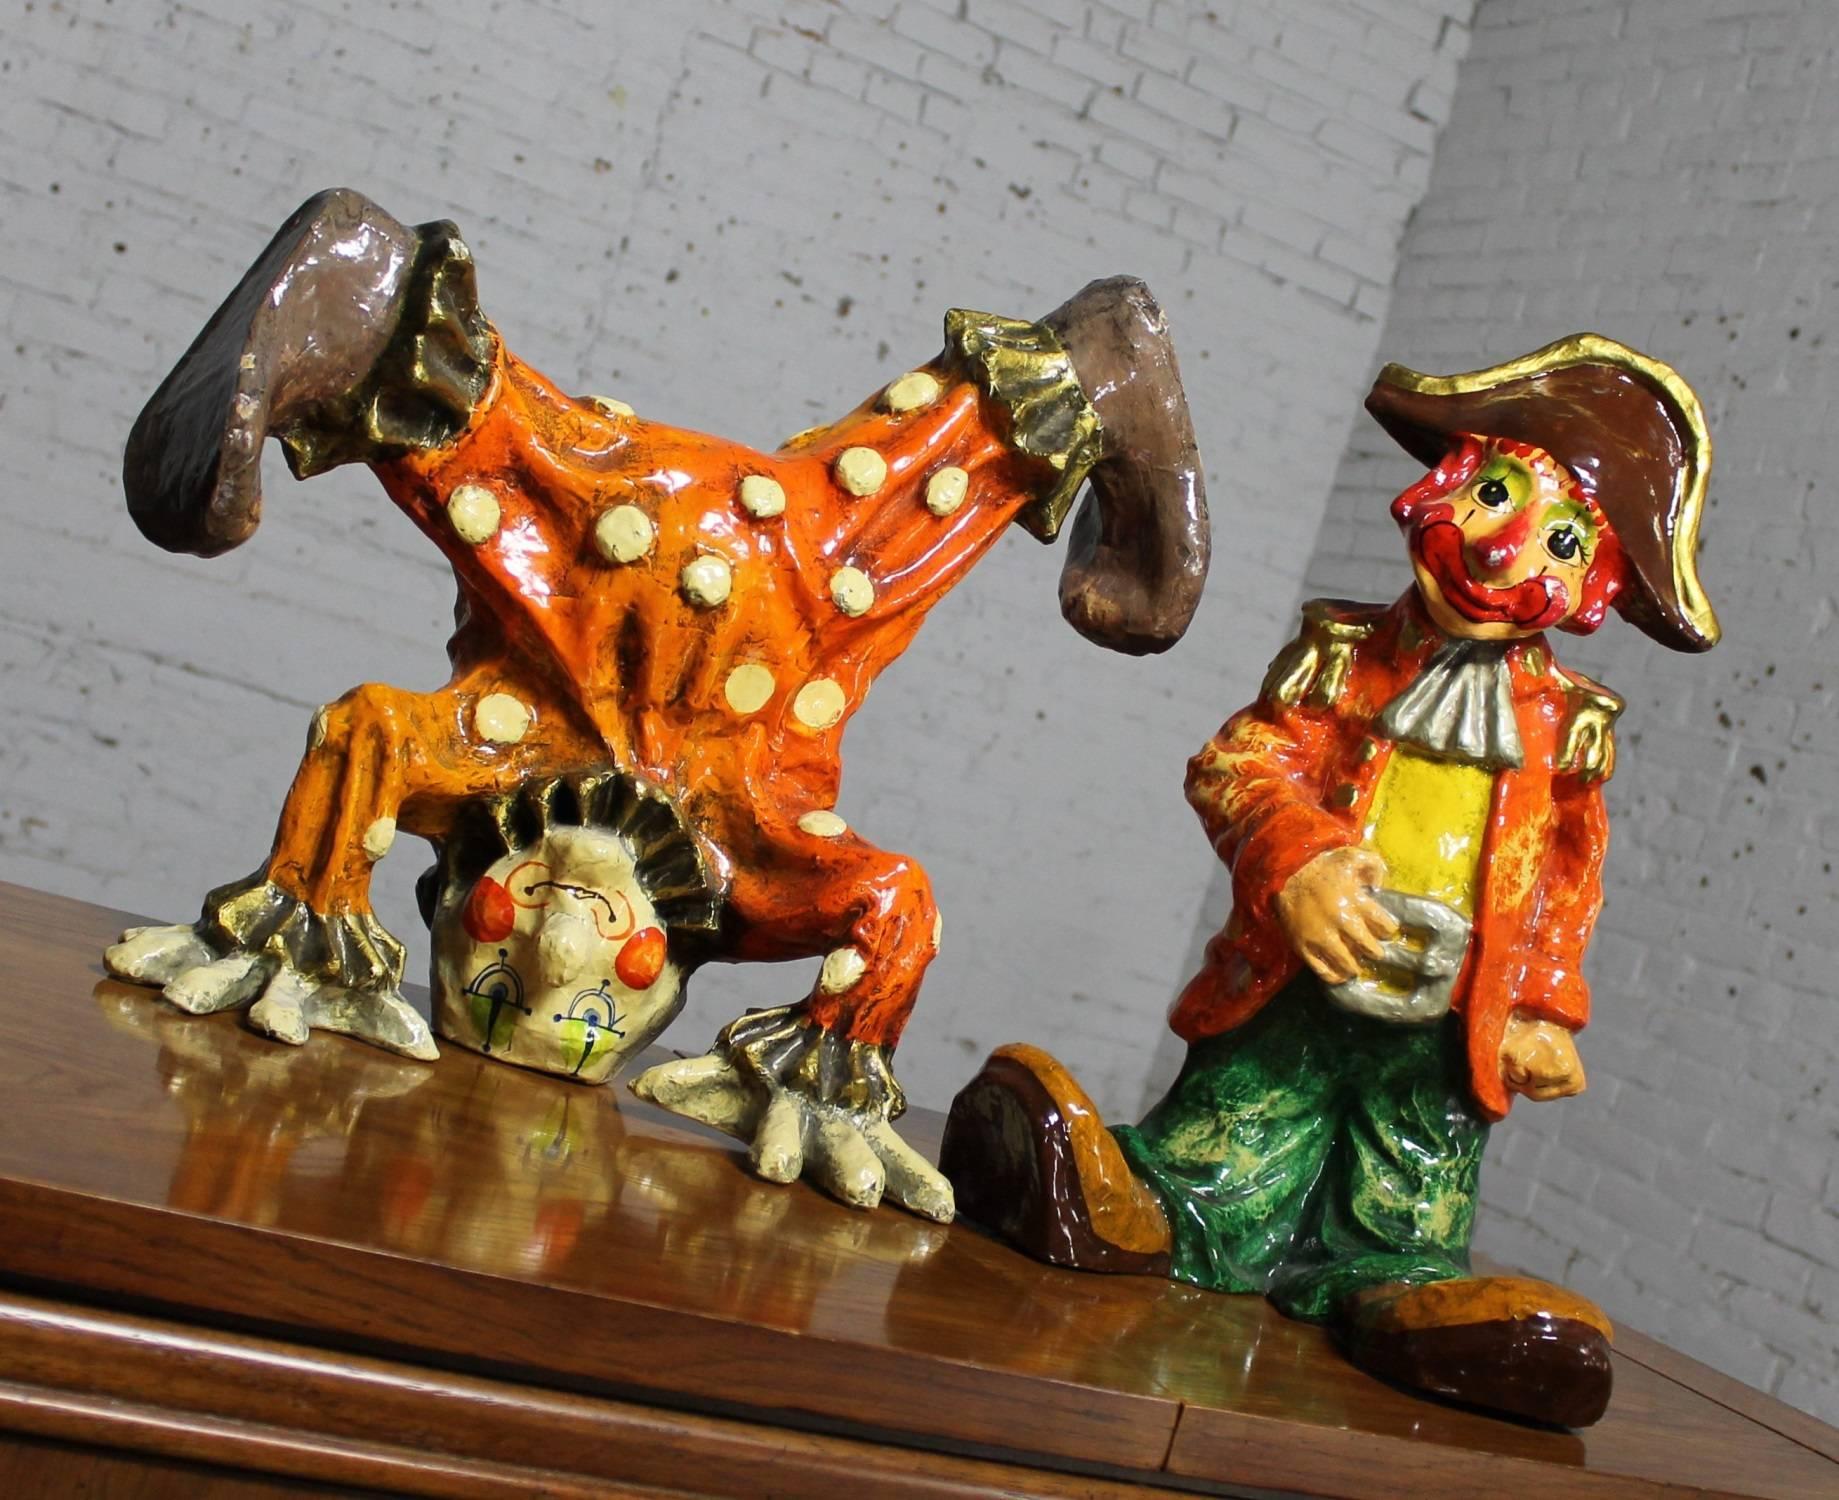 Incredible pair of papier mâché or paper mâché clown sculptures by Jeanne Valentine, circa 1960. The pair is in wonderful vintage condition.

What could be more fun and interesting than a vintage Mid-Century papier mâché sculpture of a clown? A